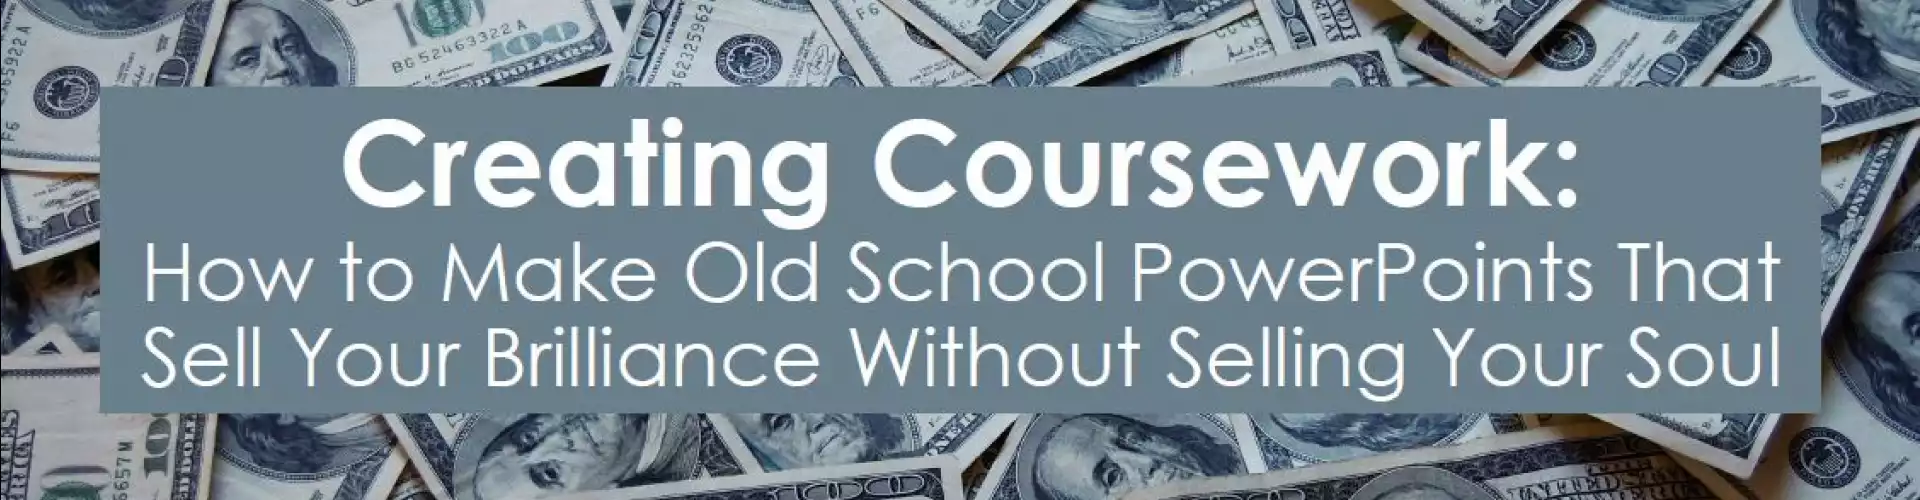 Creating Coursework: Old School PowerPoints That Sell Your Brilliance Without Selling Your Soul